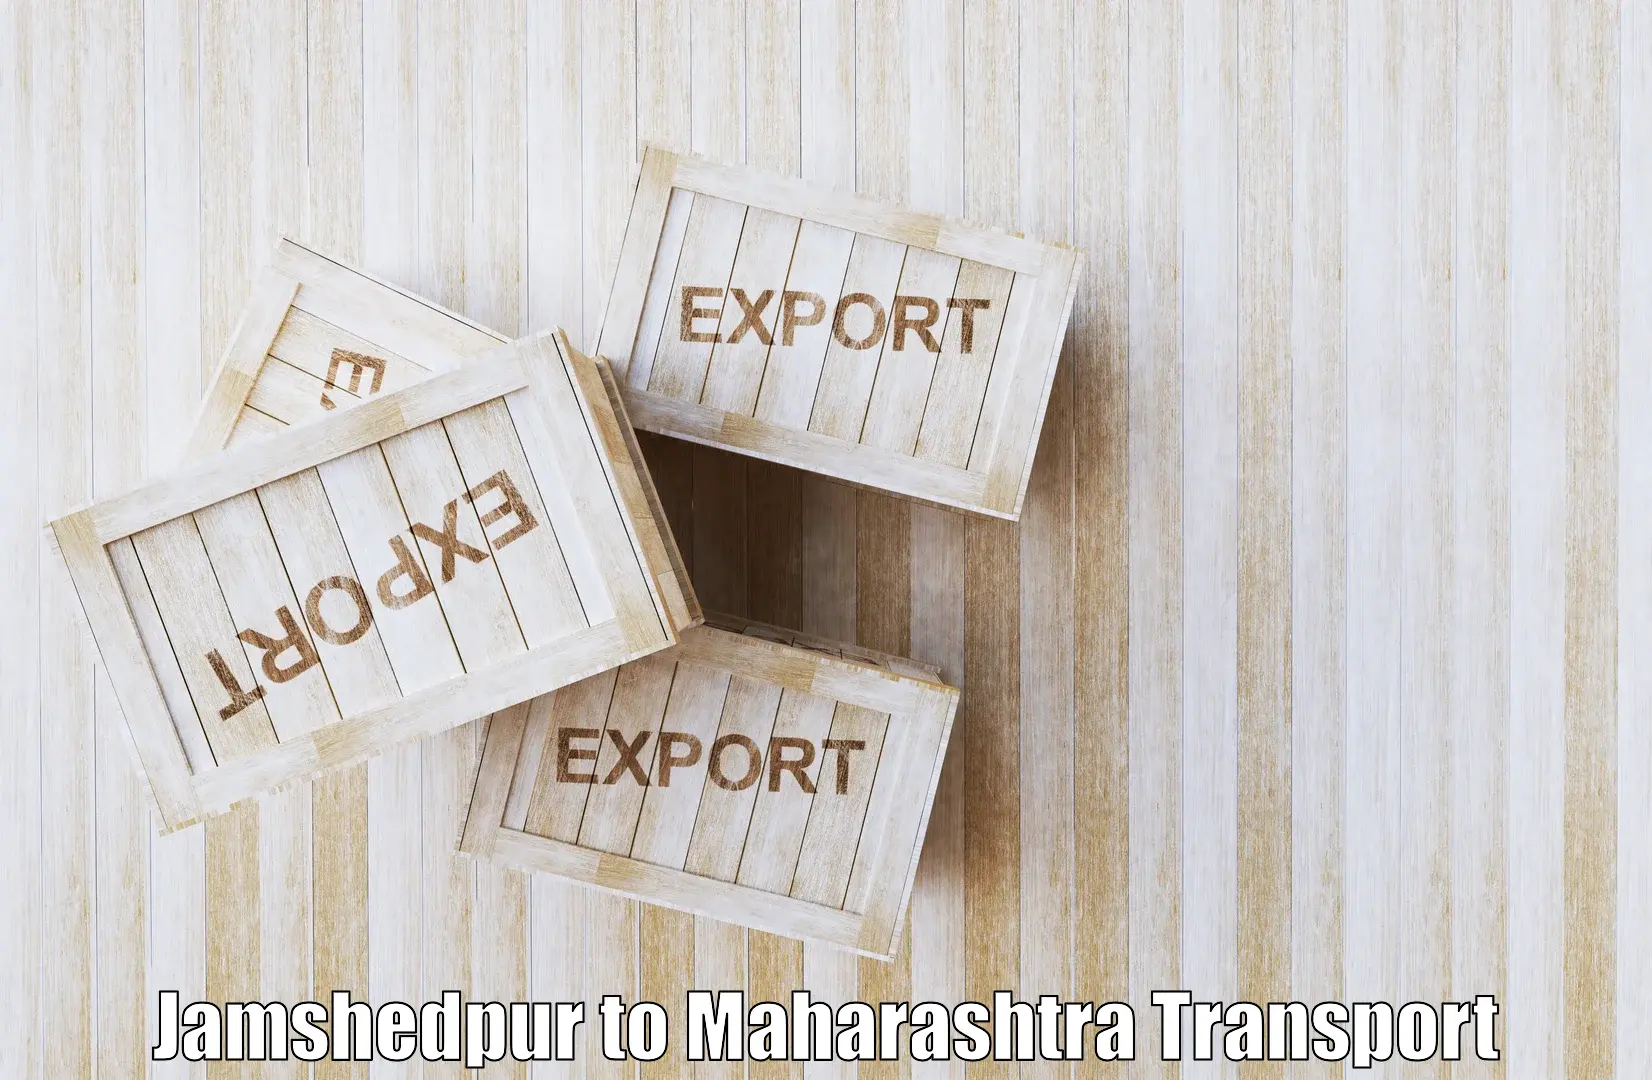 Truck transport companies in India Jamshedpur to Barshi